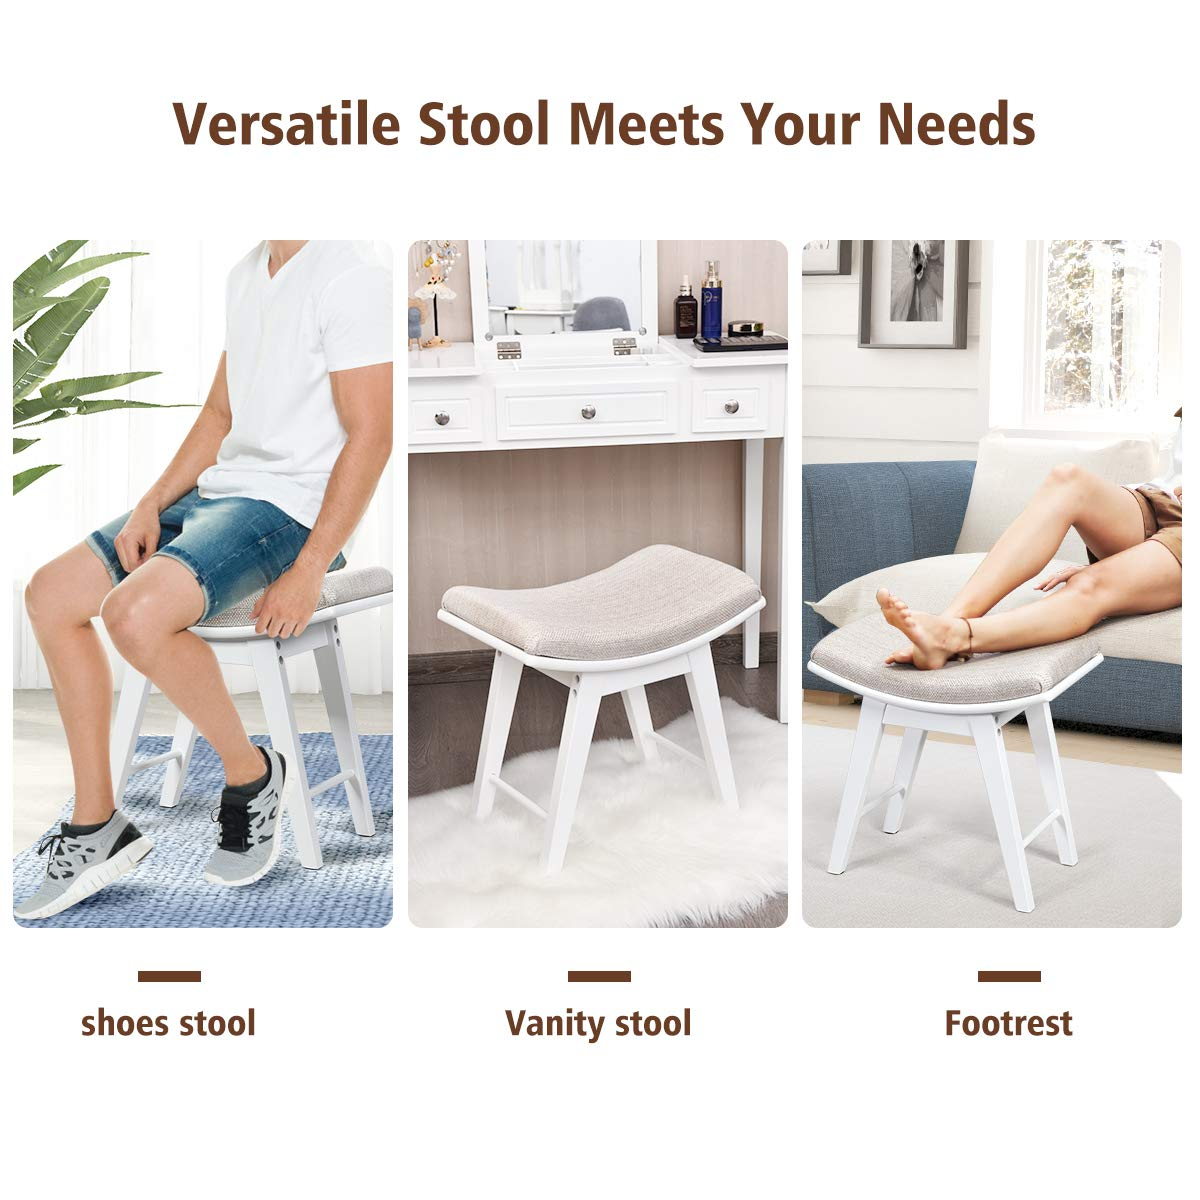 CHARMAID Vanity Stool, Makeup Dressing Stool with Concave Seat Surface